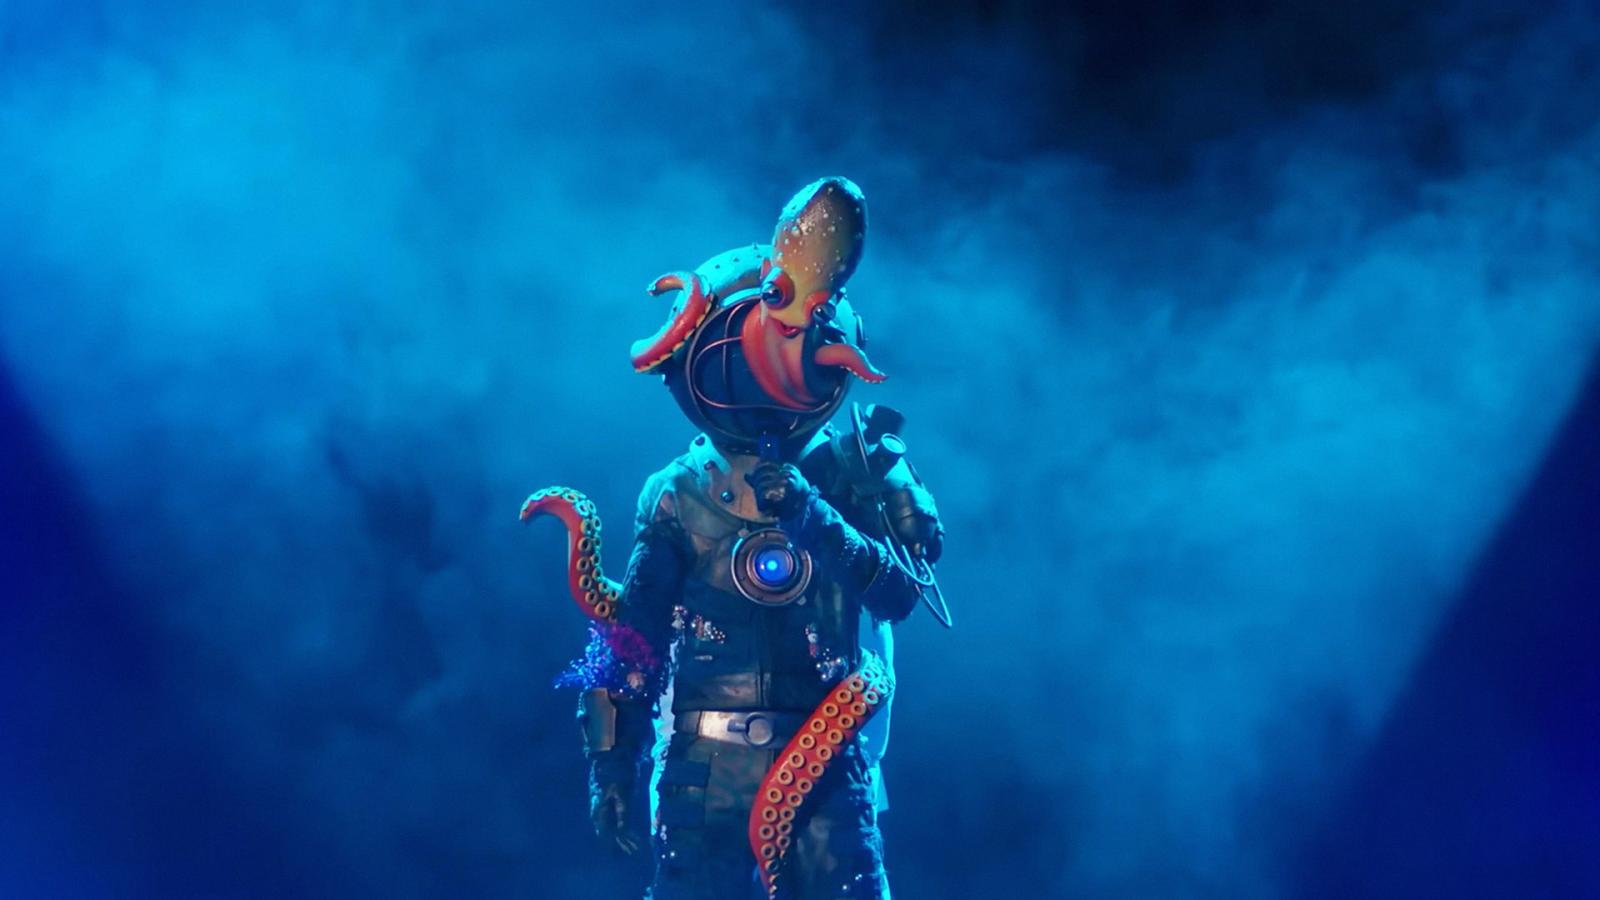 Masked Singer S10 Premiere Performances, Ranked From Worst to Best - image 2